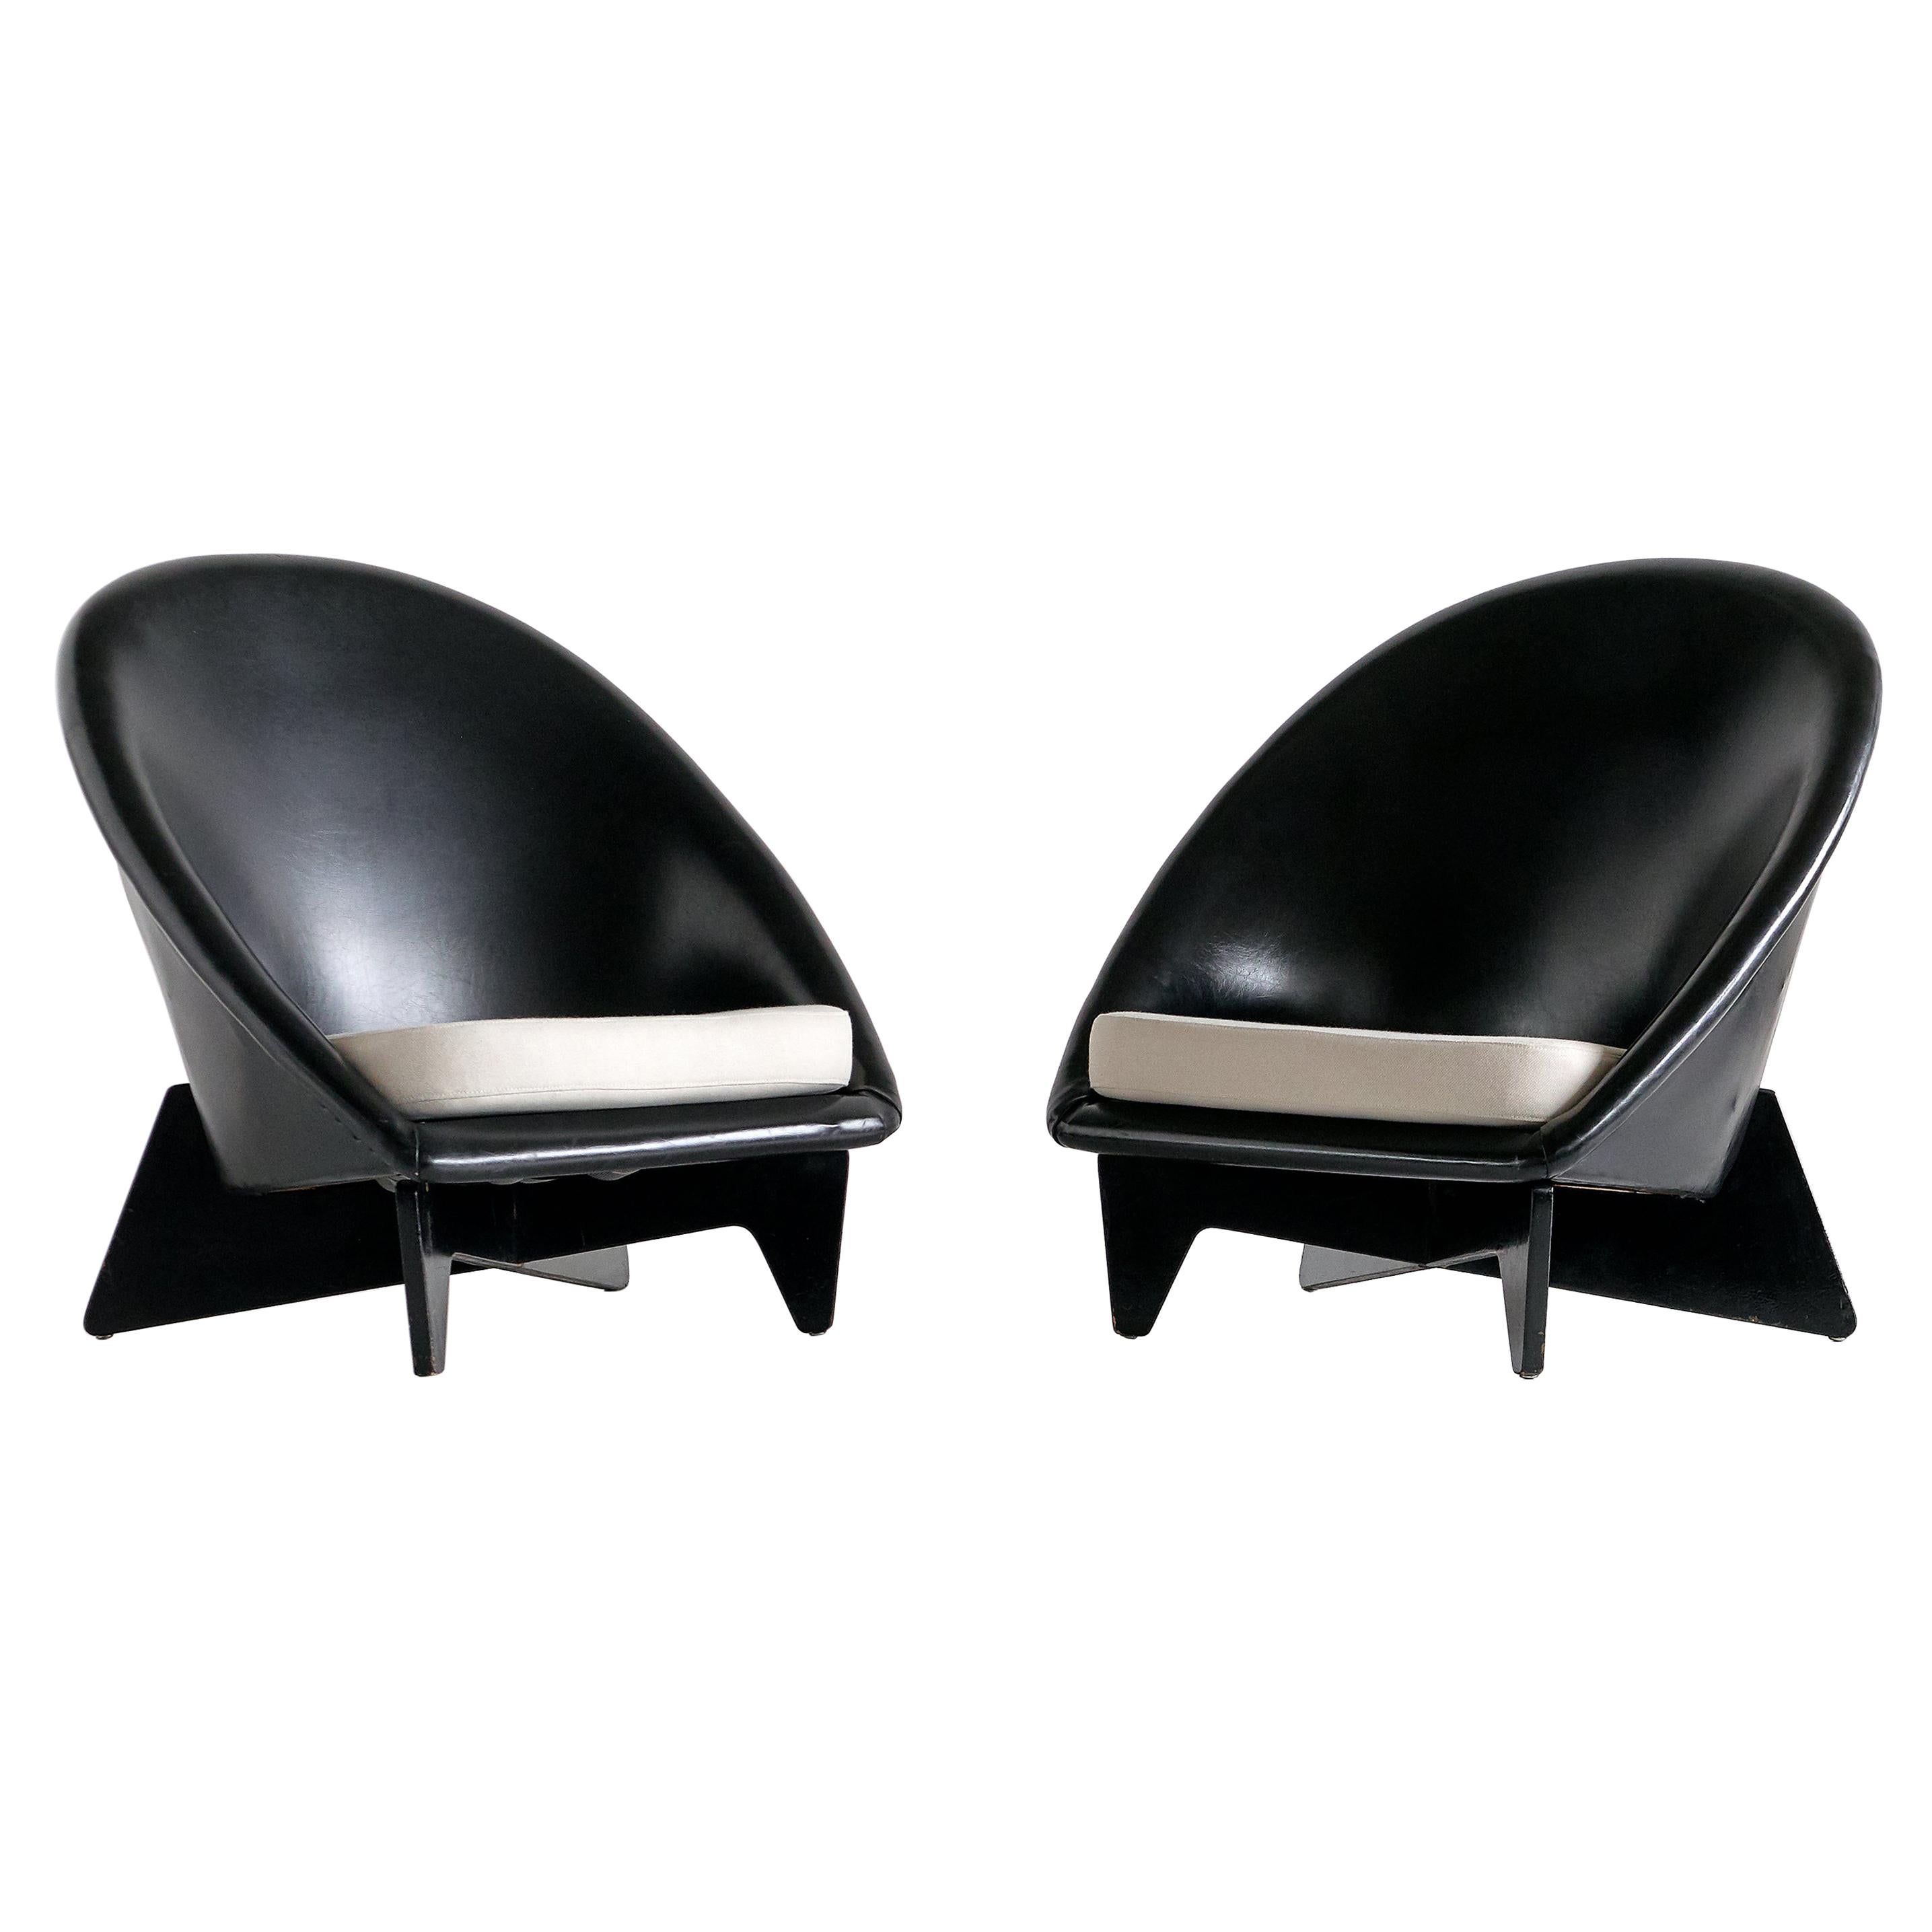 Pair of Antti Nurmesniemi Lounge Chairs Designed for Hotel Palace, Finland, 1952